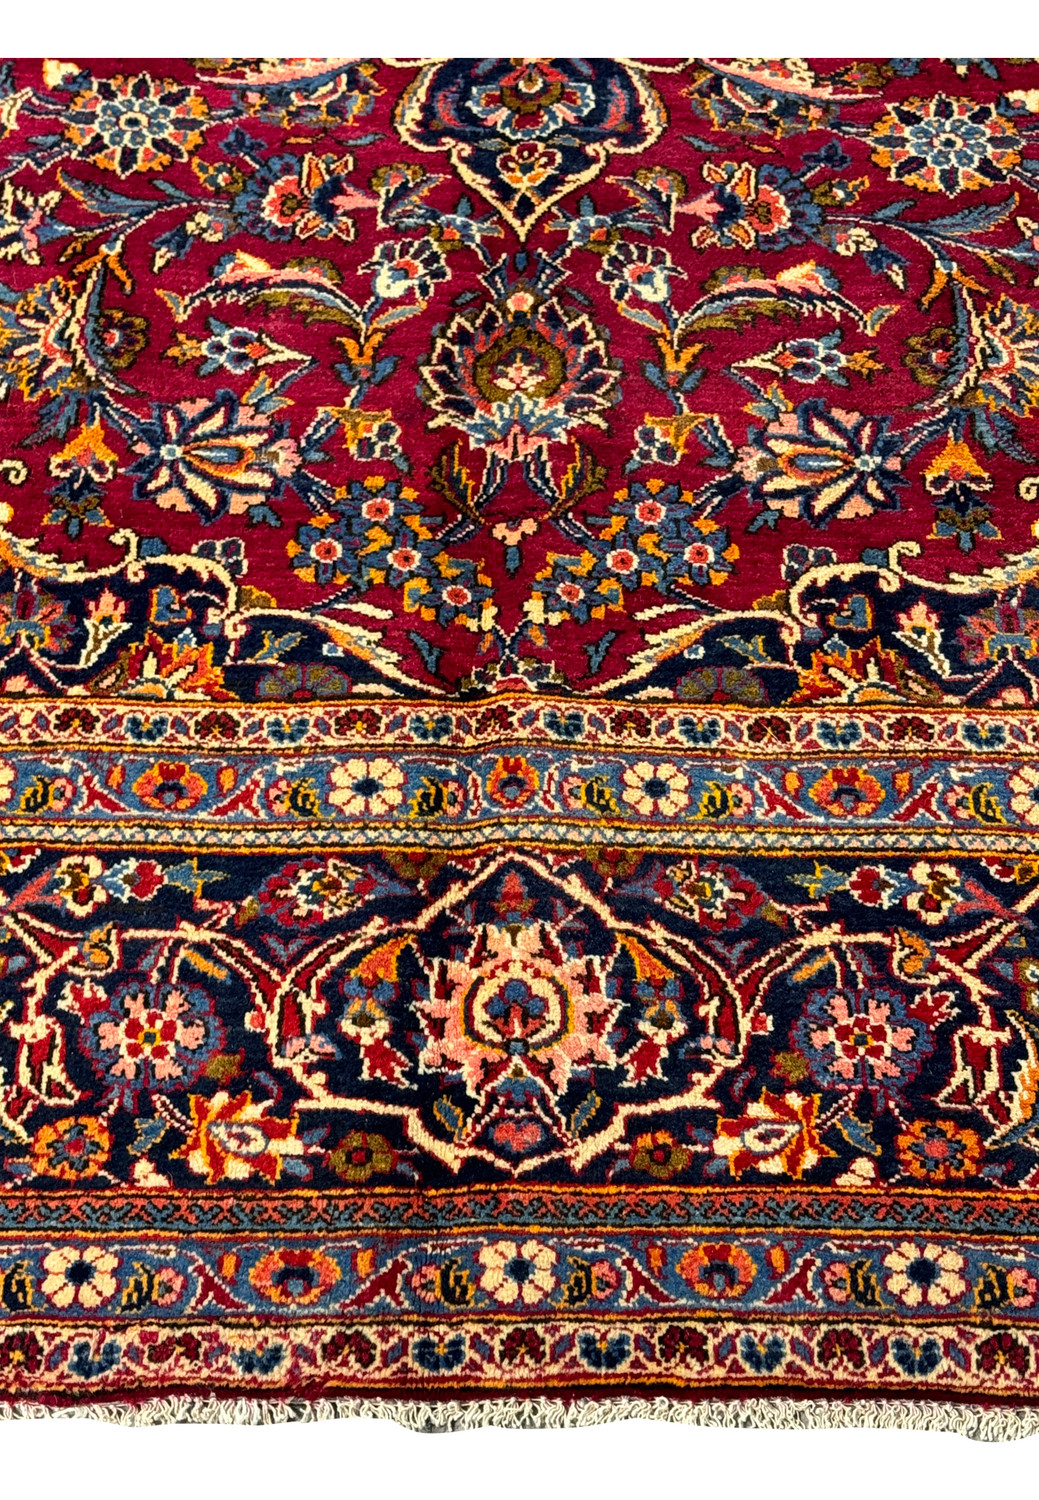 Corner detail of the Persian Kashan rug, where the opulent border meets the vibrant, patterned field.